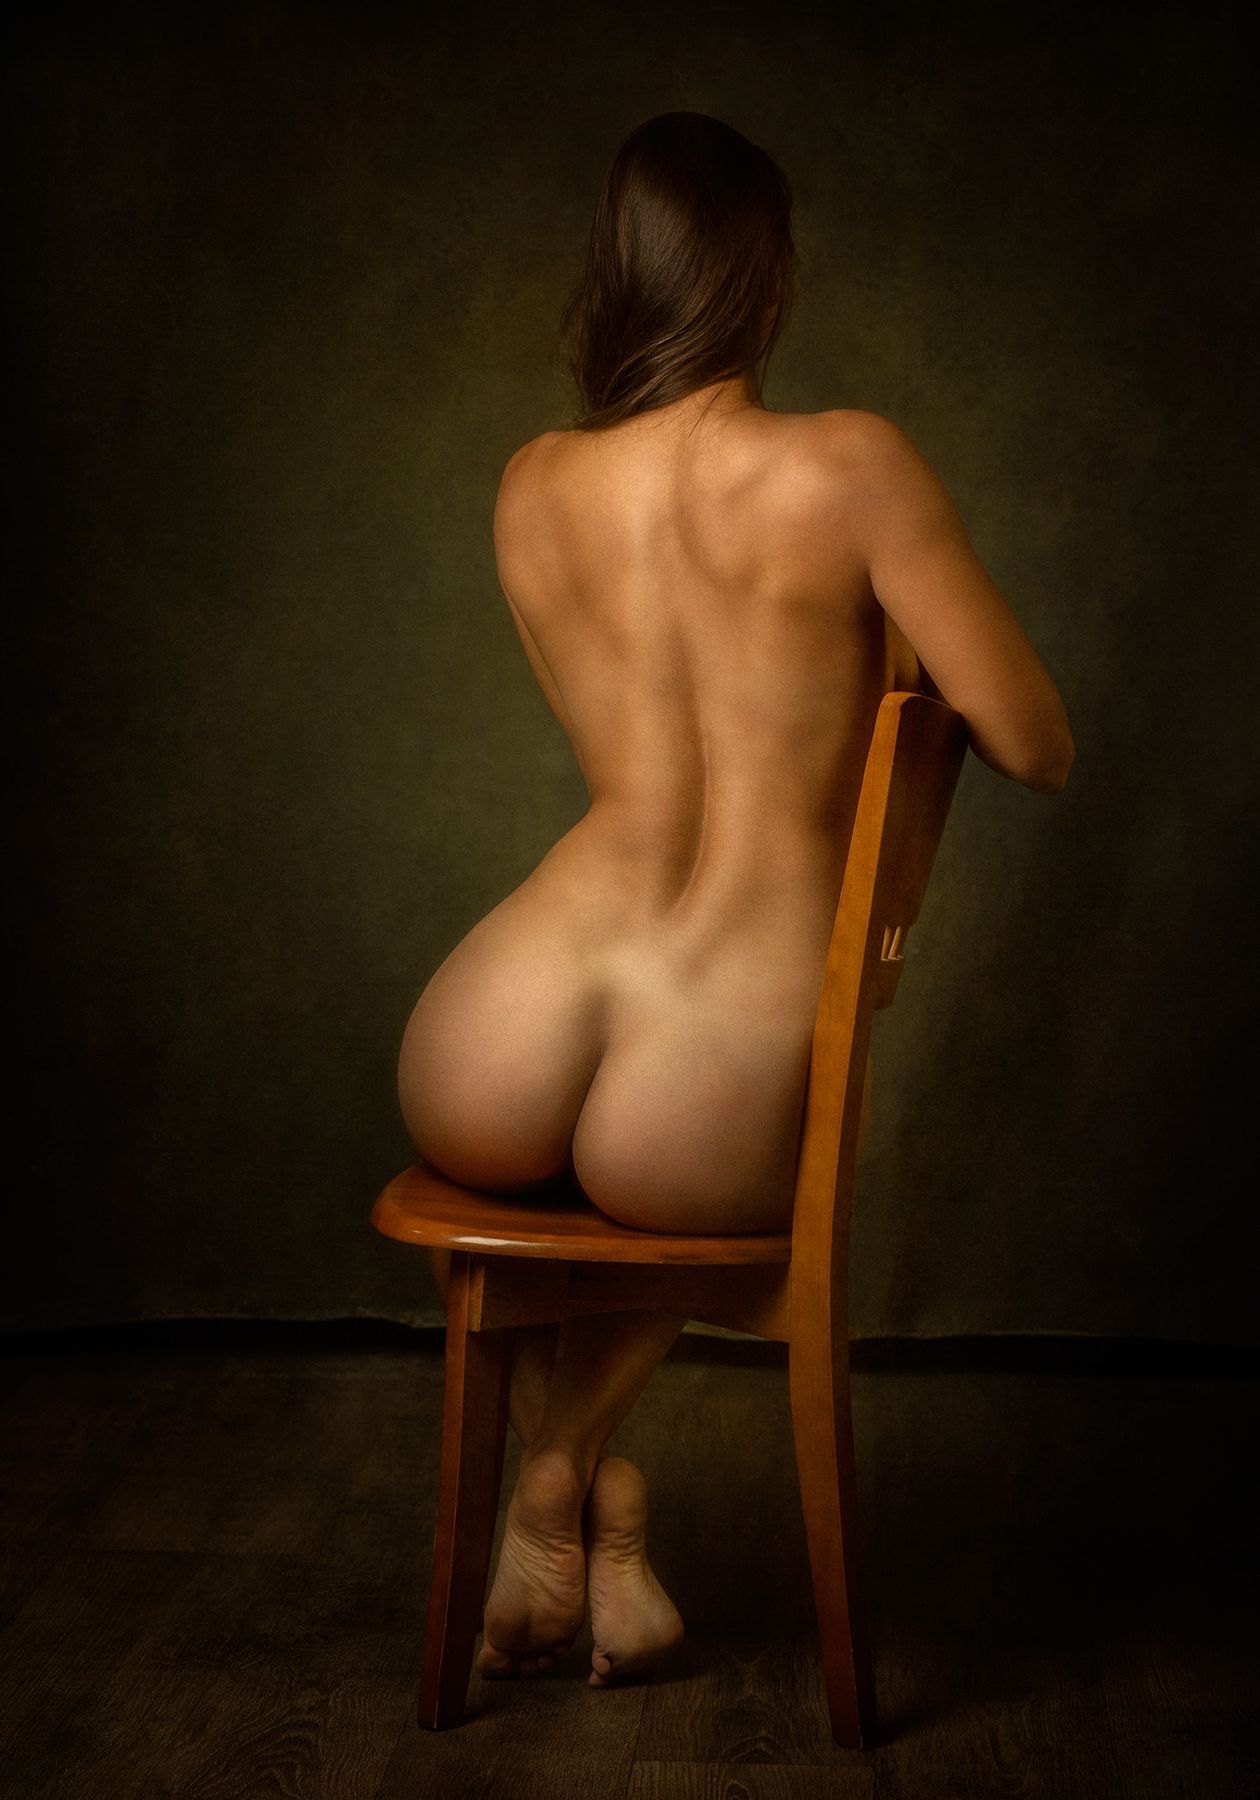 Nude Girls The Best Photos From The Photosite For The Period